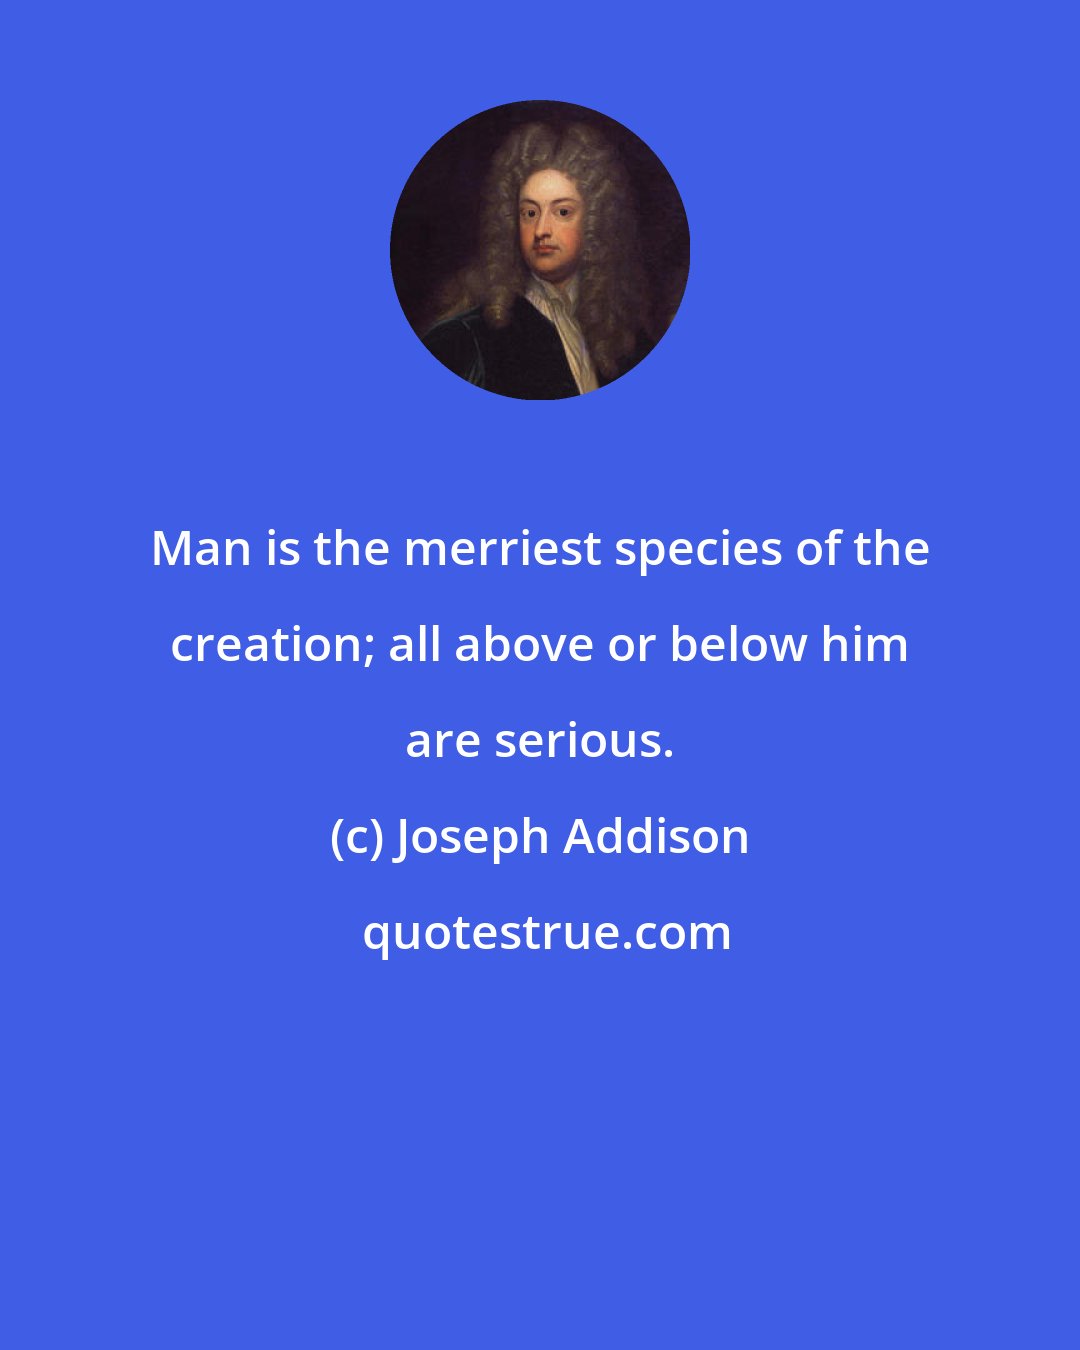 Joseph Addison: Man is the merriest species of the creation; all above or below him are serious.